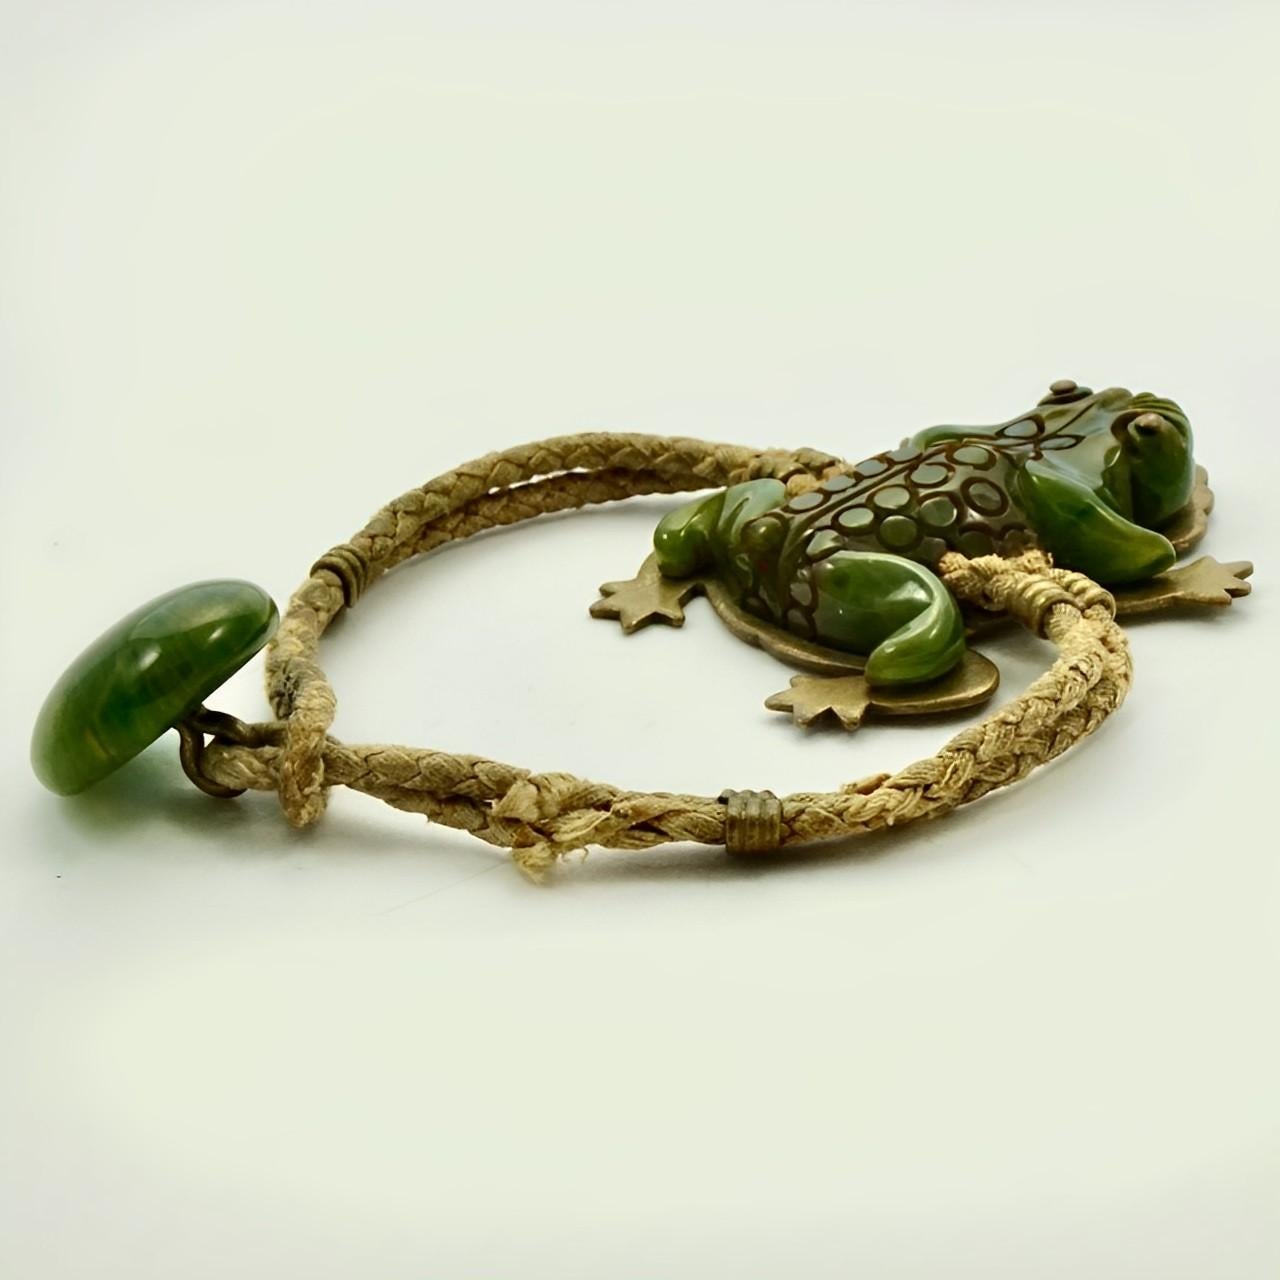 Women's or Men's Art Deco Brass and Carved Bakelite Marbled Green Frog Bracelet with Plaited Cord